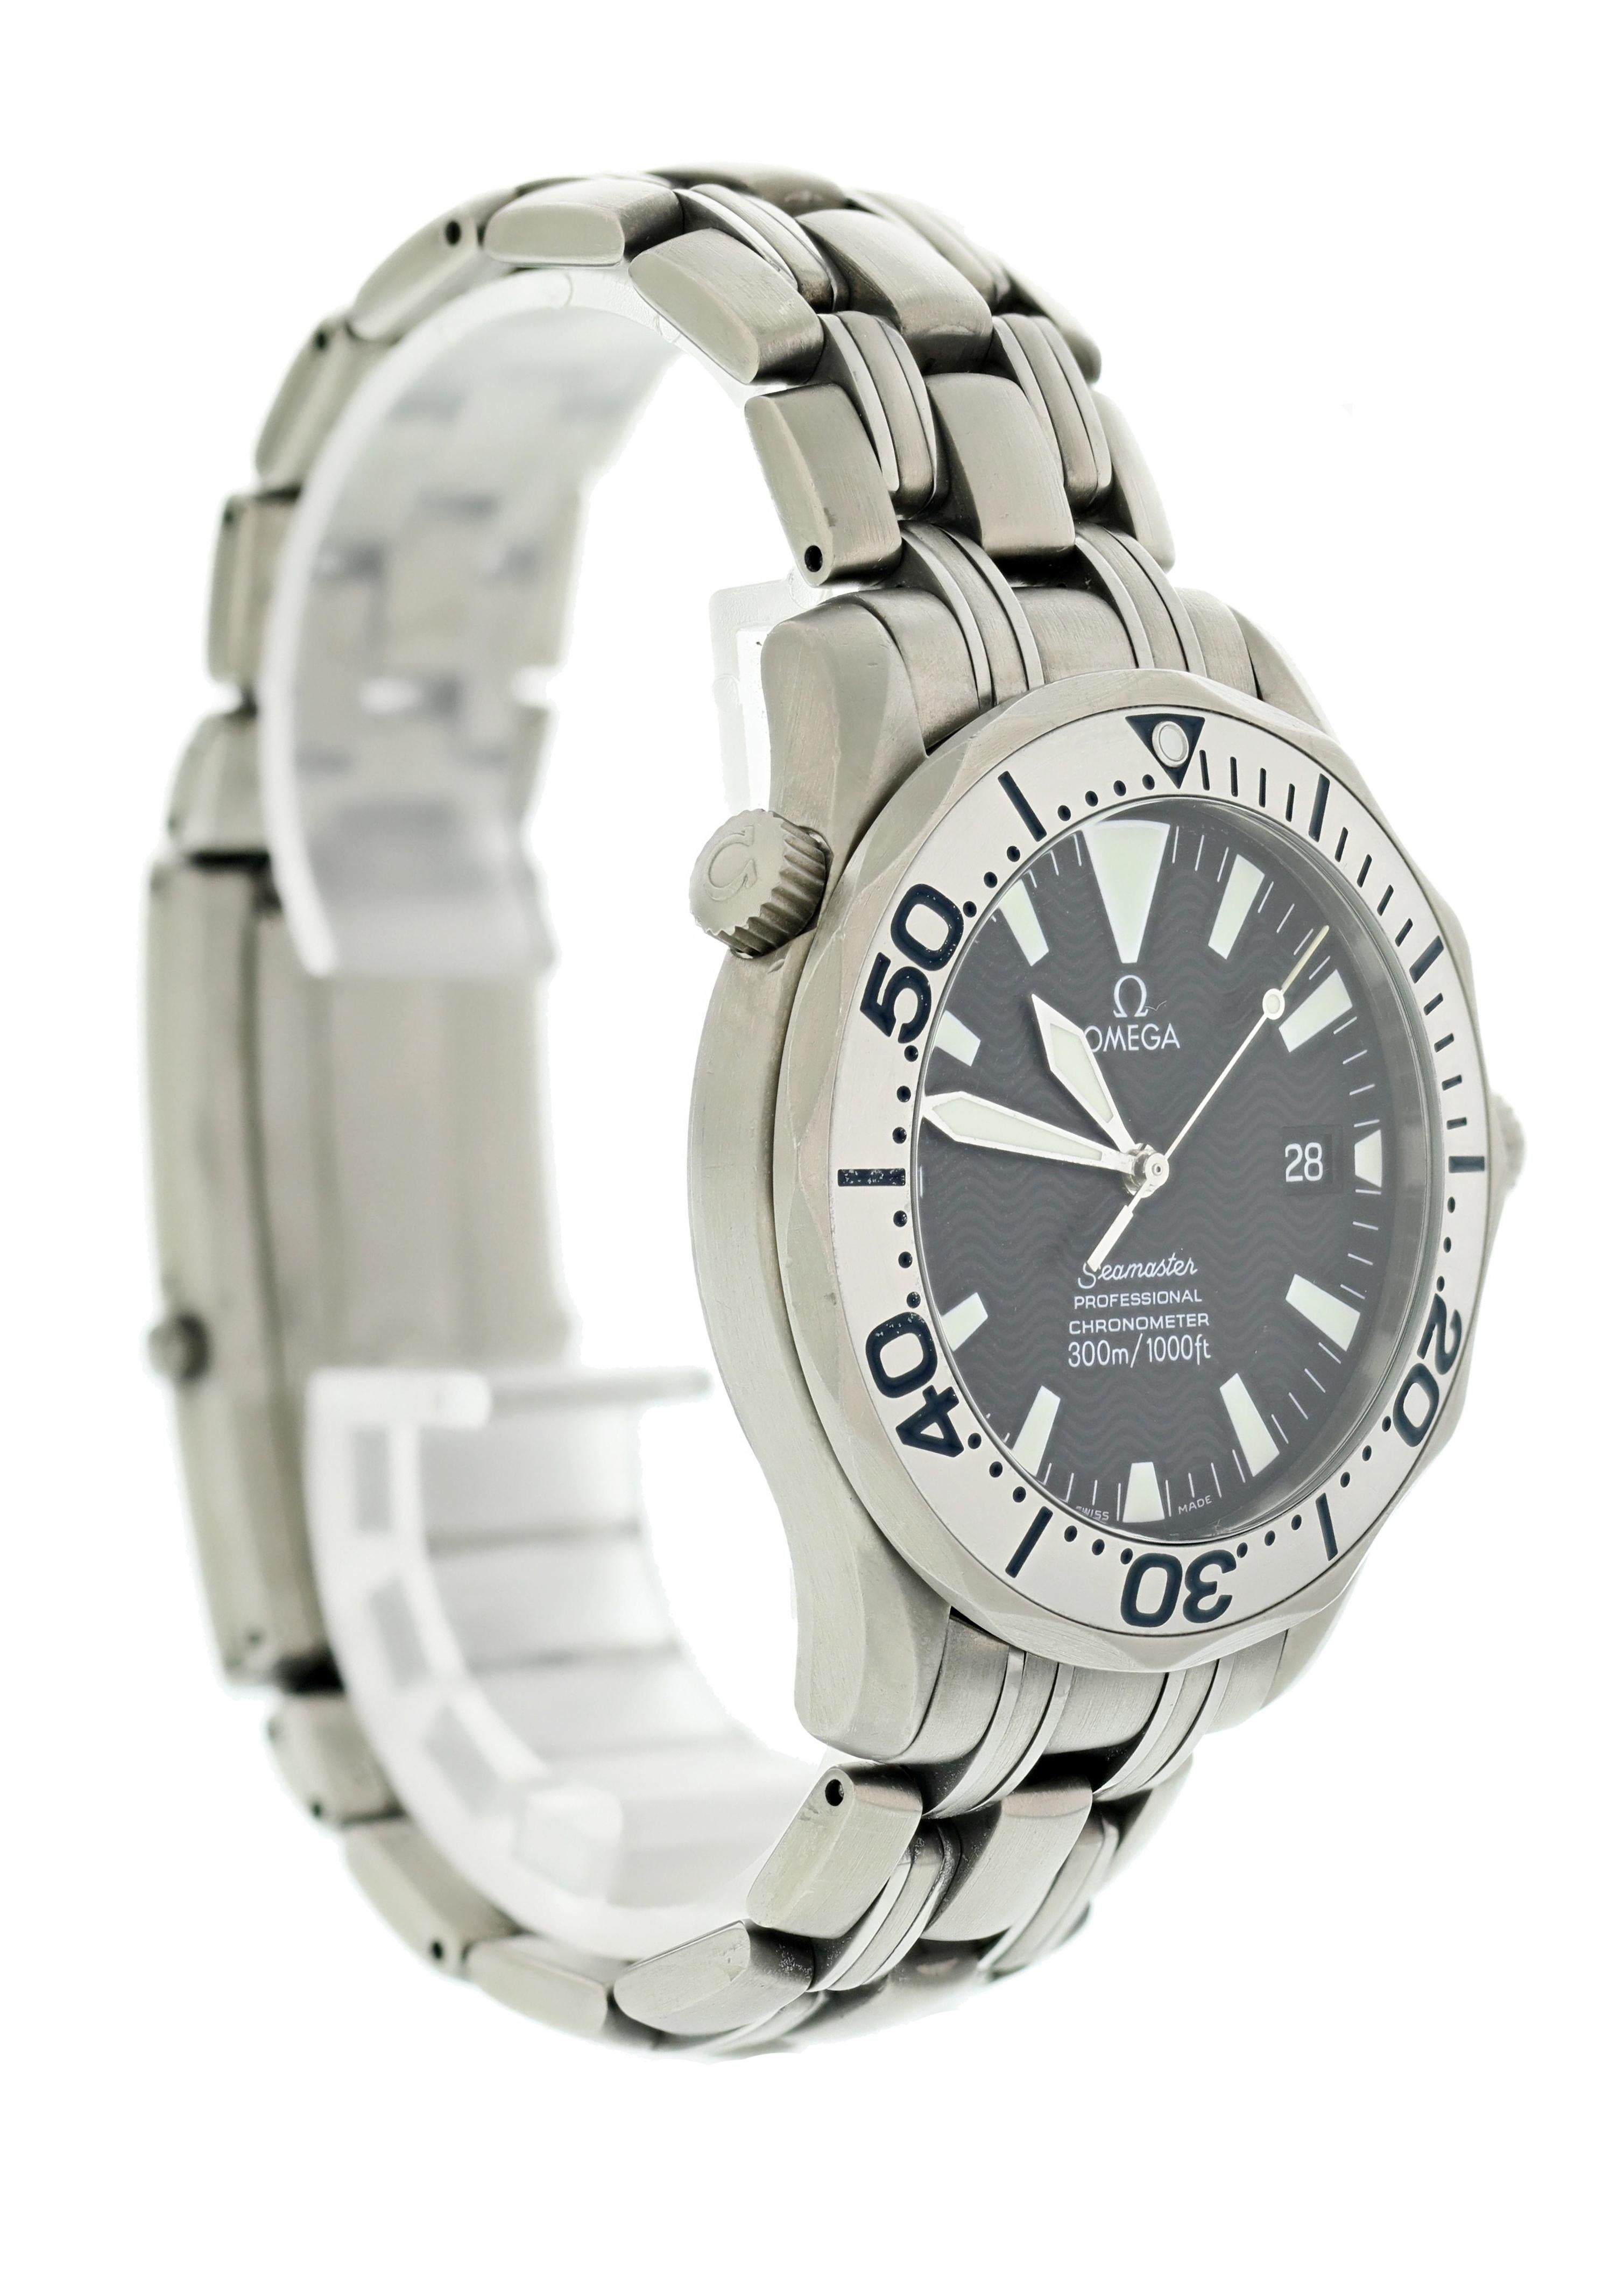 Omega Seamaster Professional 2231.80 Titanium Men’s Watch For Sale at ...